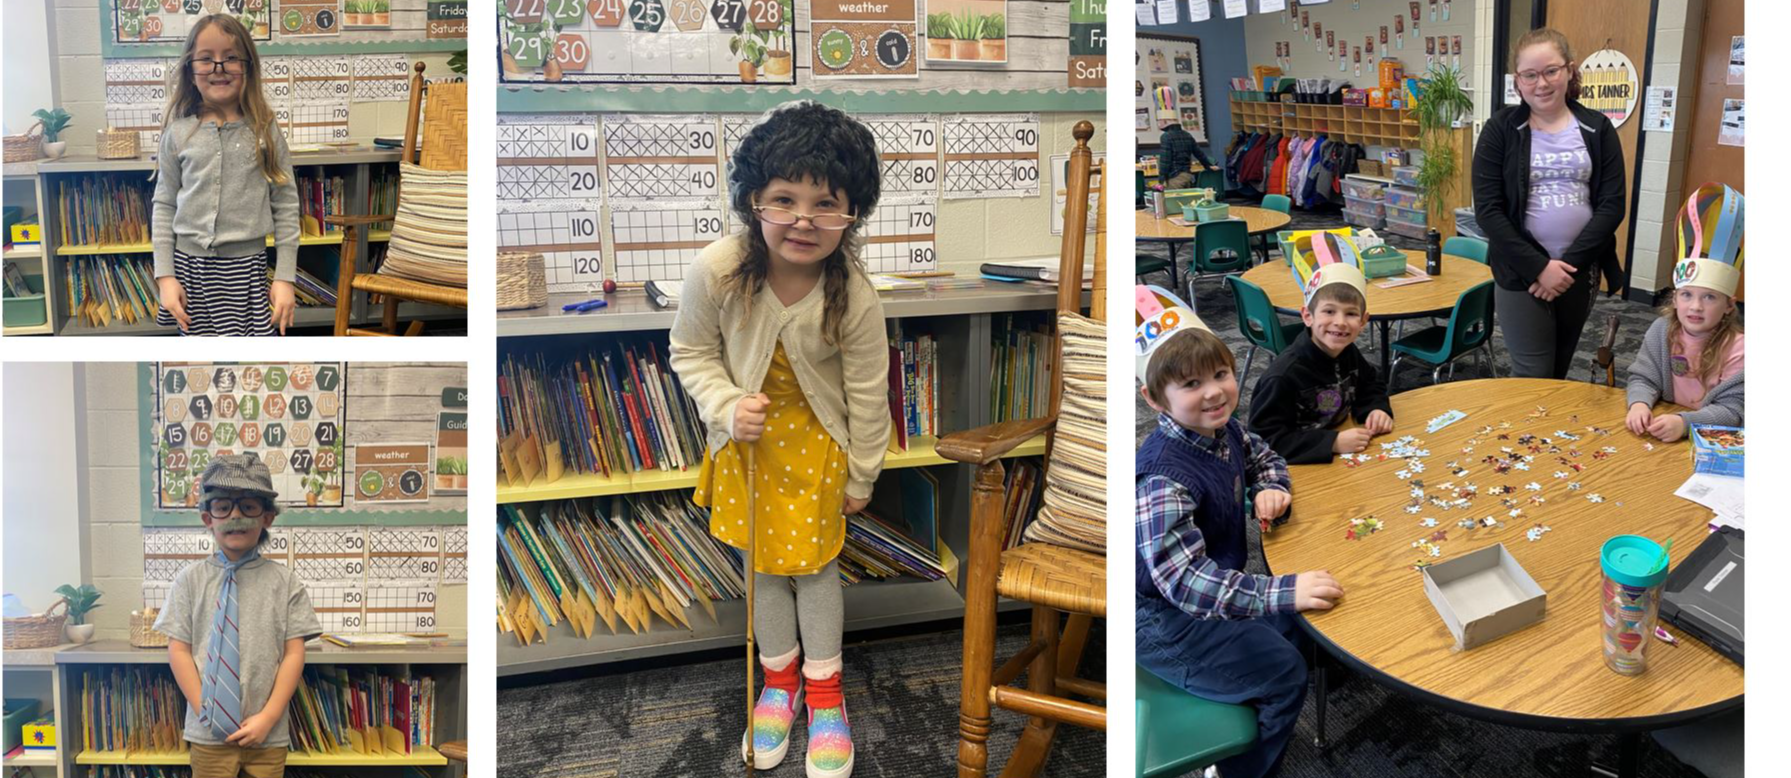 100th day of school - kids dress-up as 100 year olds